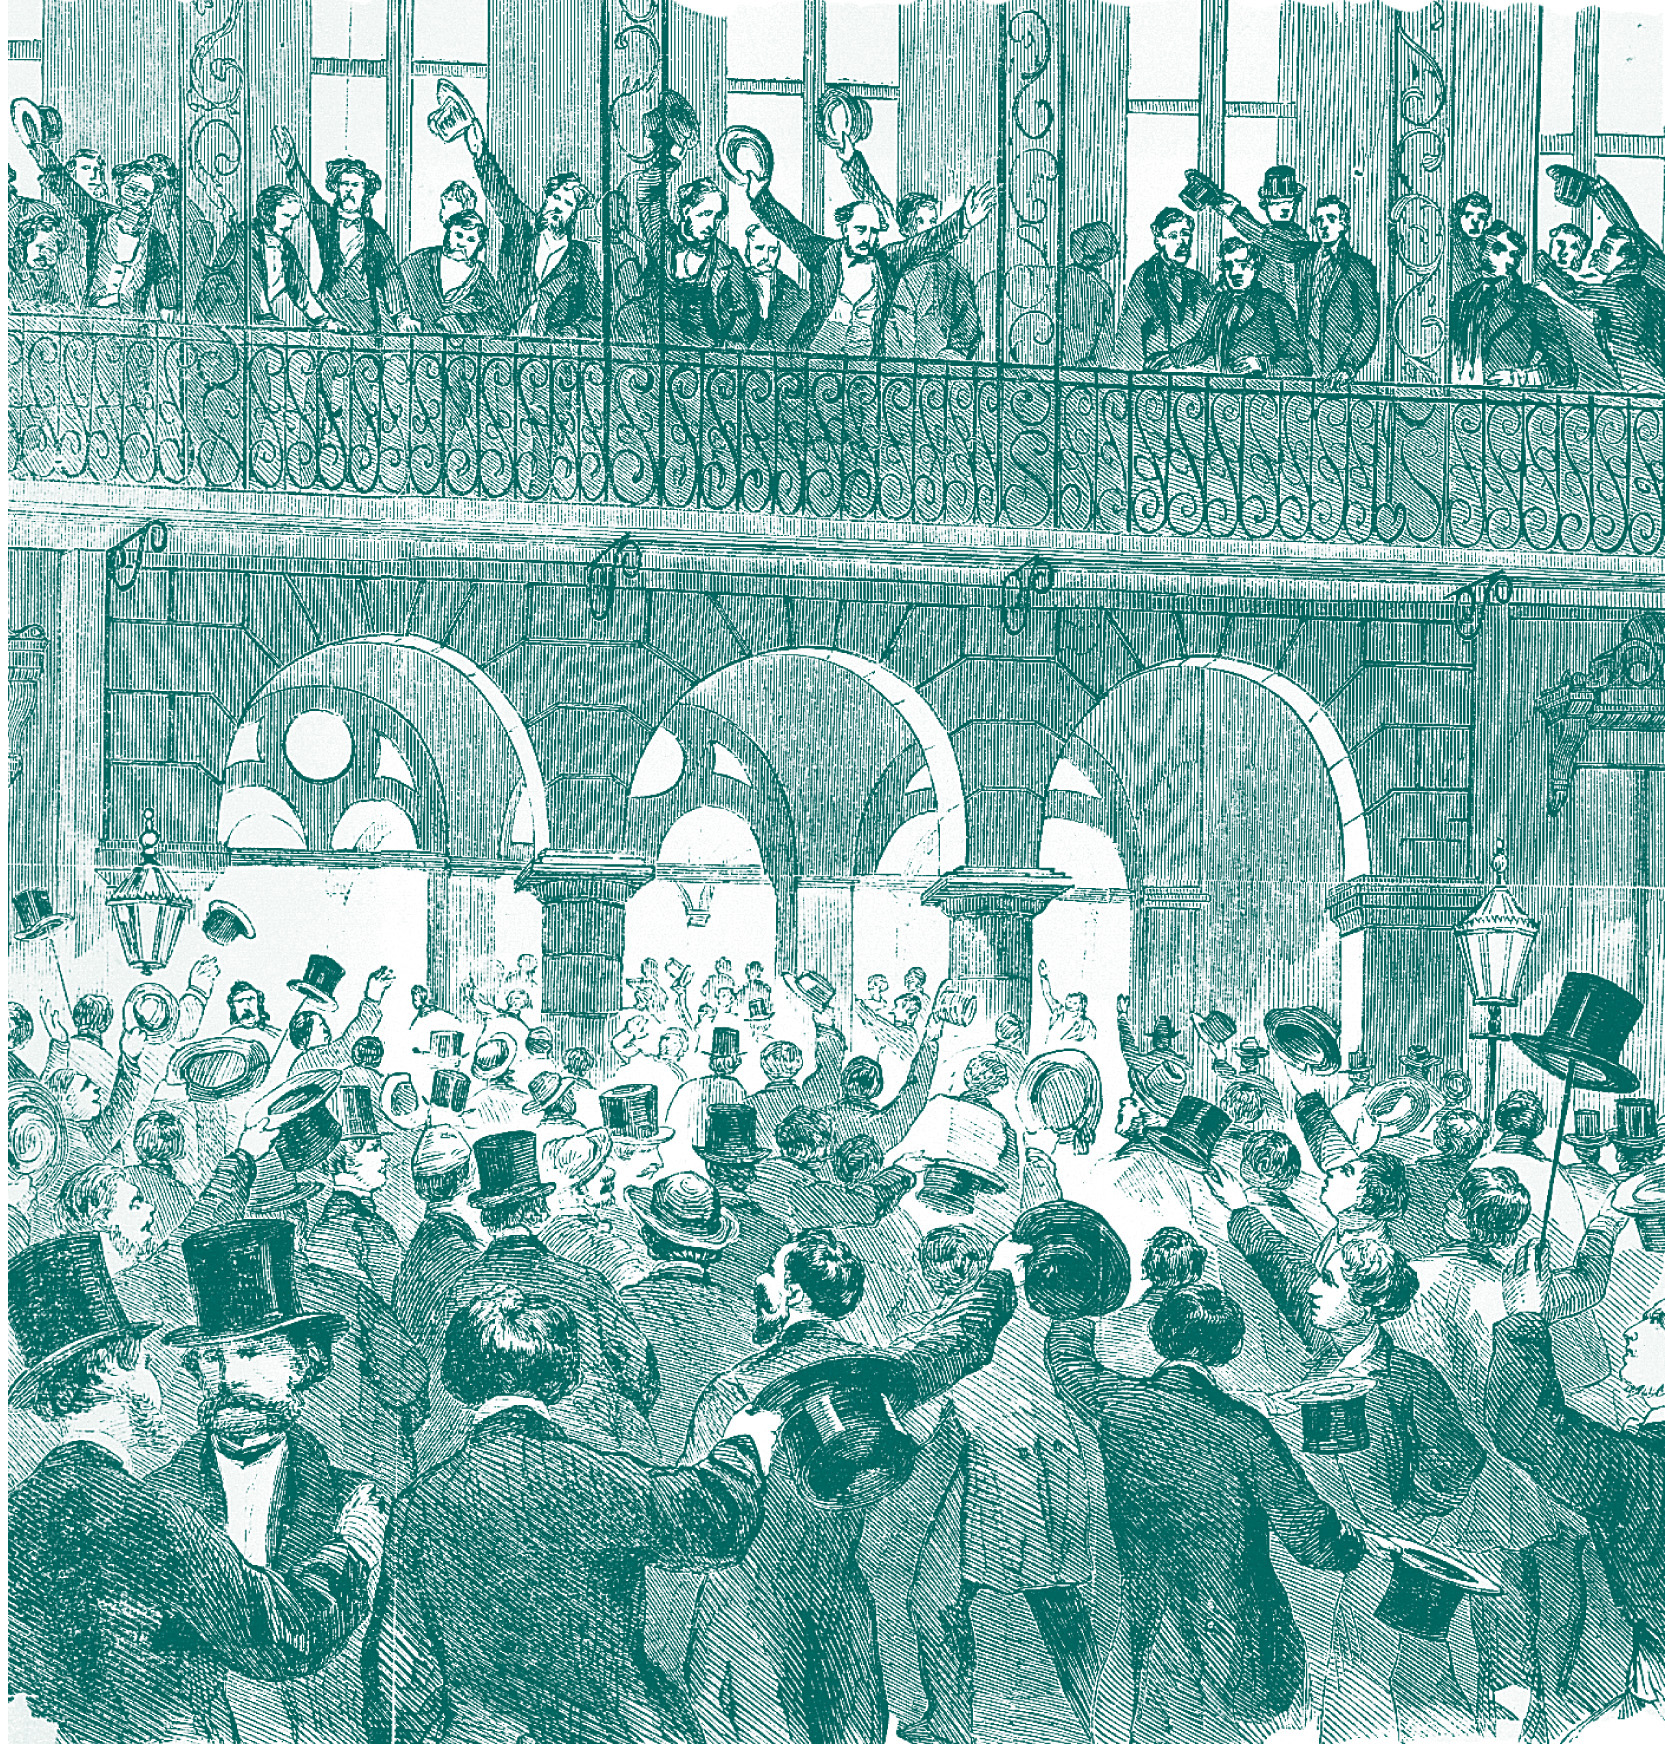 Ana crowd of  illustration shows men raising their hats and cheering outside a large hotel.